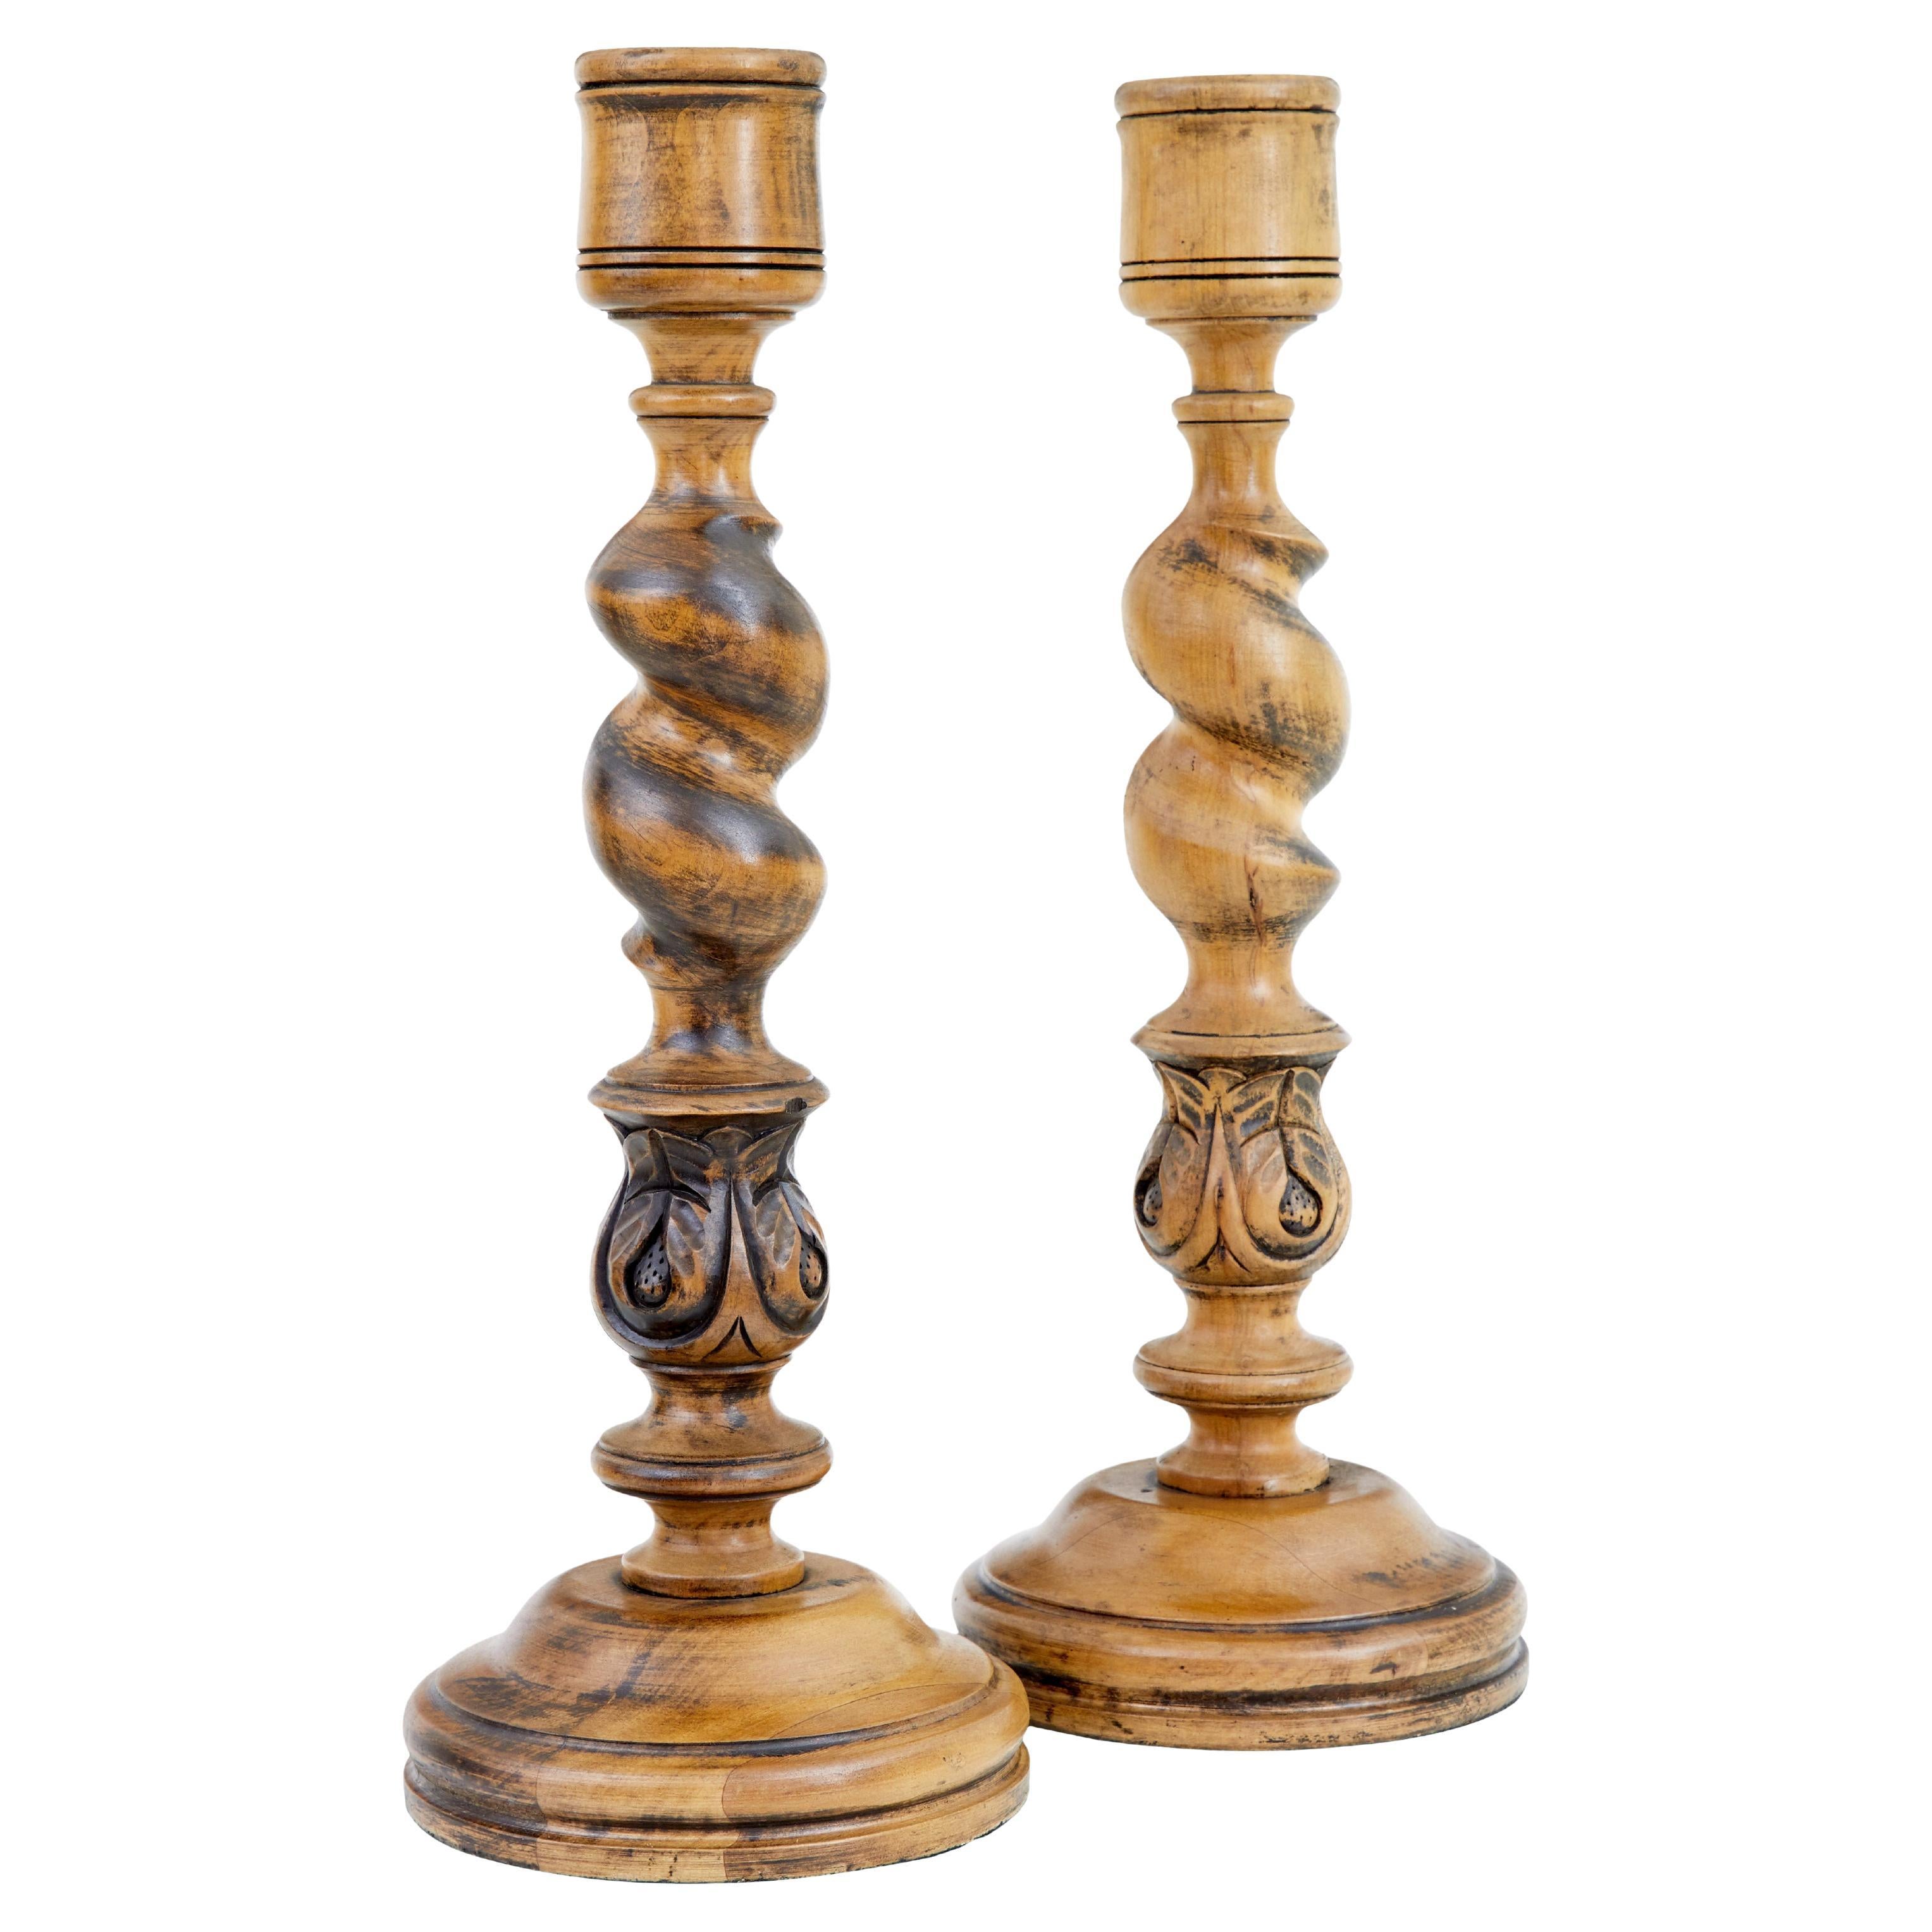 Pair of large early 20th century candlesticks